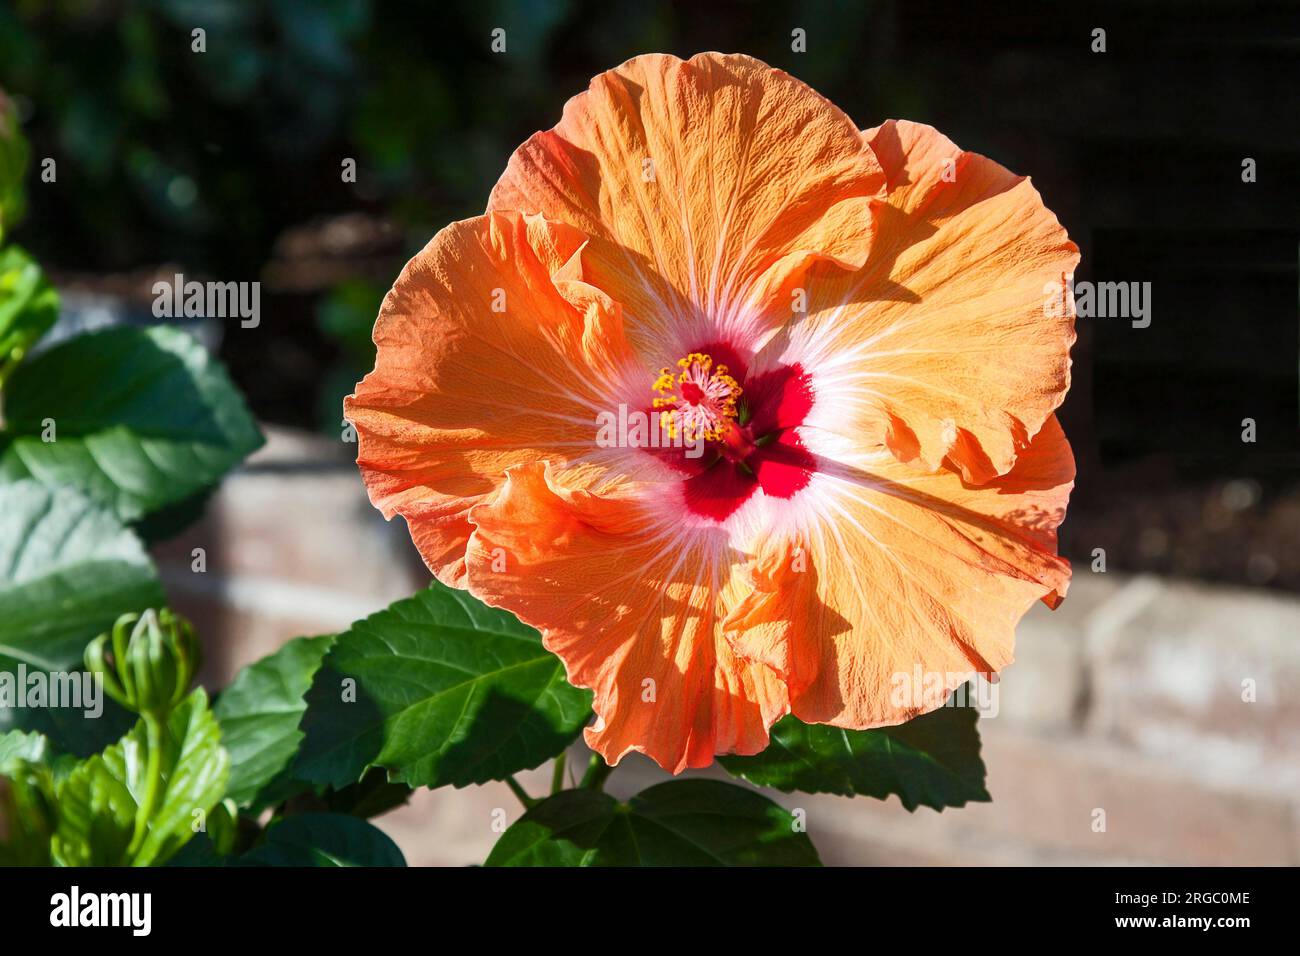 light orange hibiscus, cultivated flower, close-up, glossy green leaves, close-up; shrub, Malvaceae family; nature; summer, horizontal Stock Photo